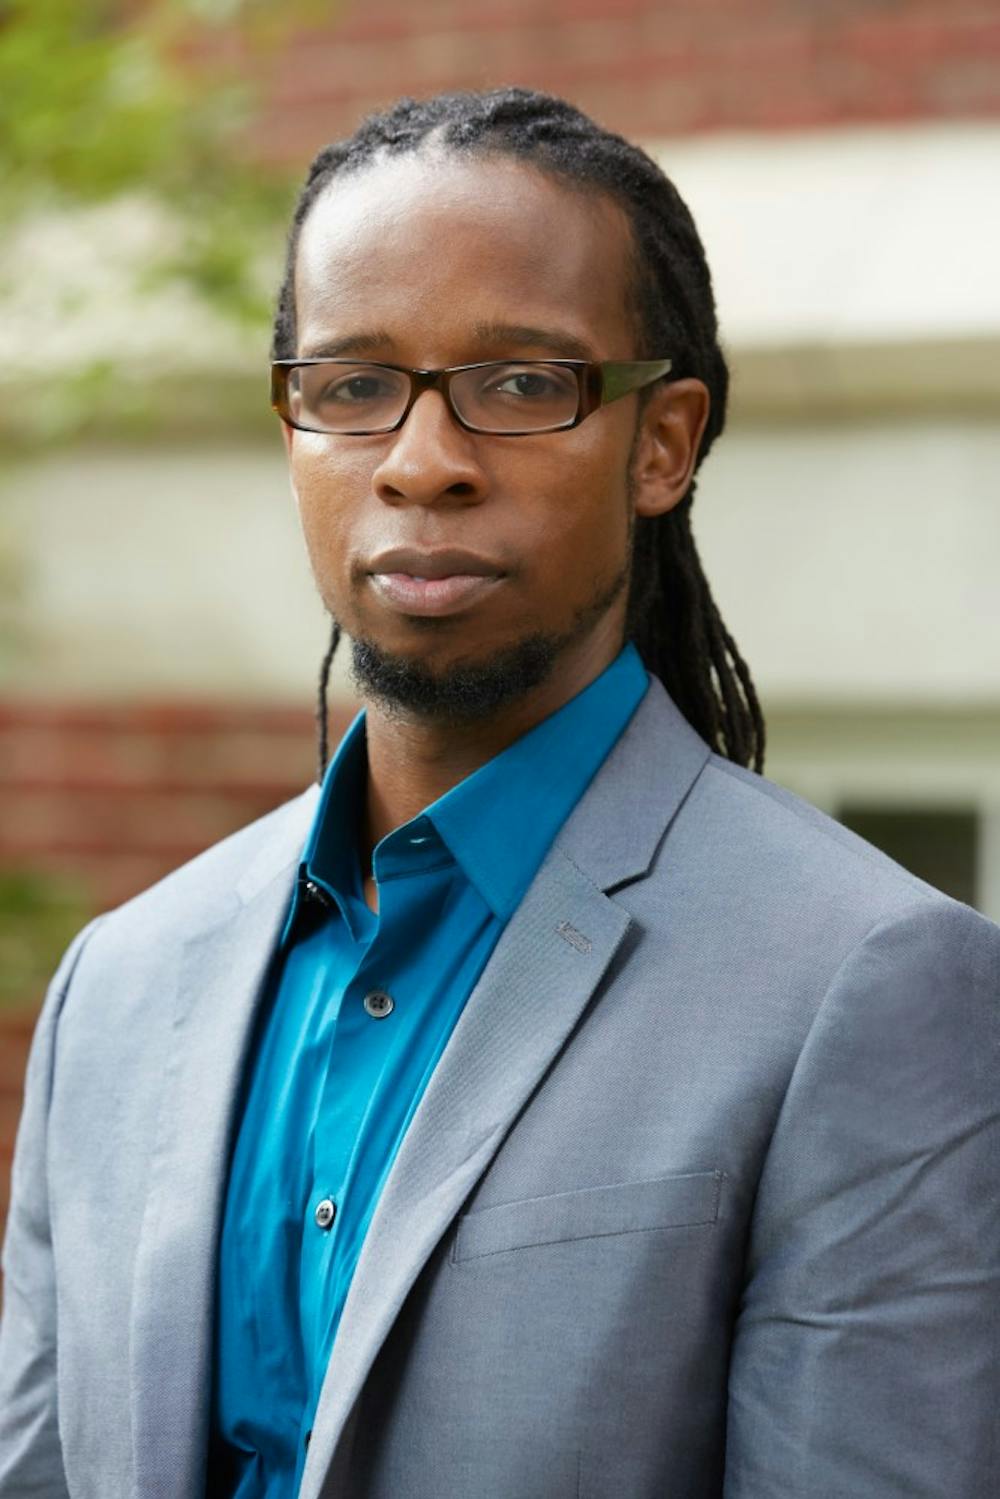 Ibram X. Kendi will leave AU and join Boston University faculty to develop antiracist research center